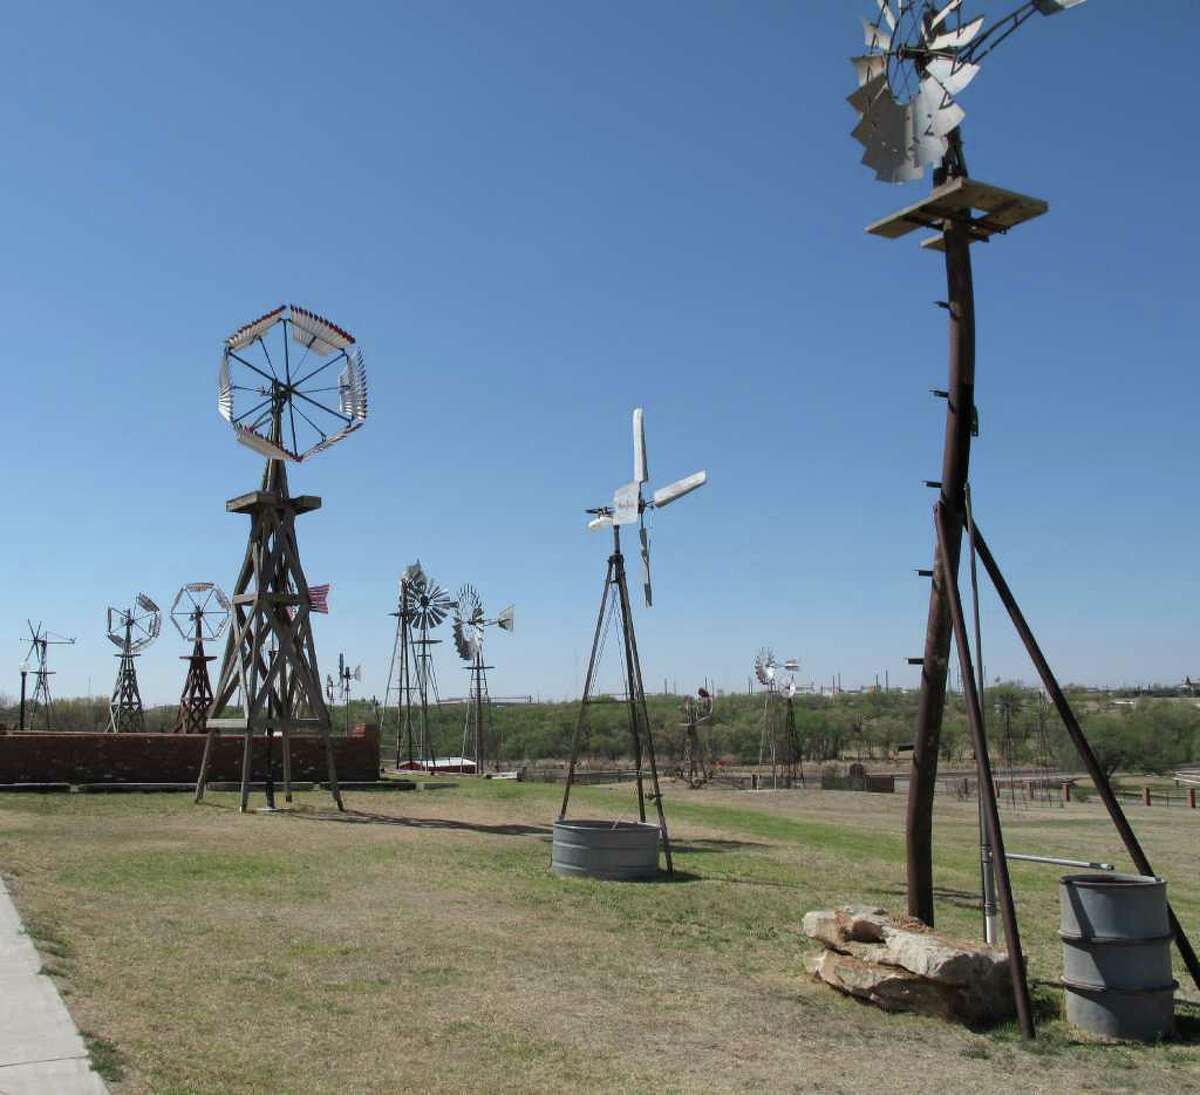 40. Lubbock In this photo, American Wind Power Center in Lubbock shows a variety of wilndmill styles.